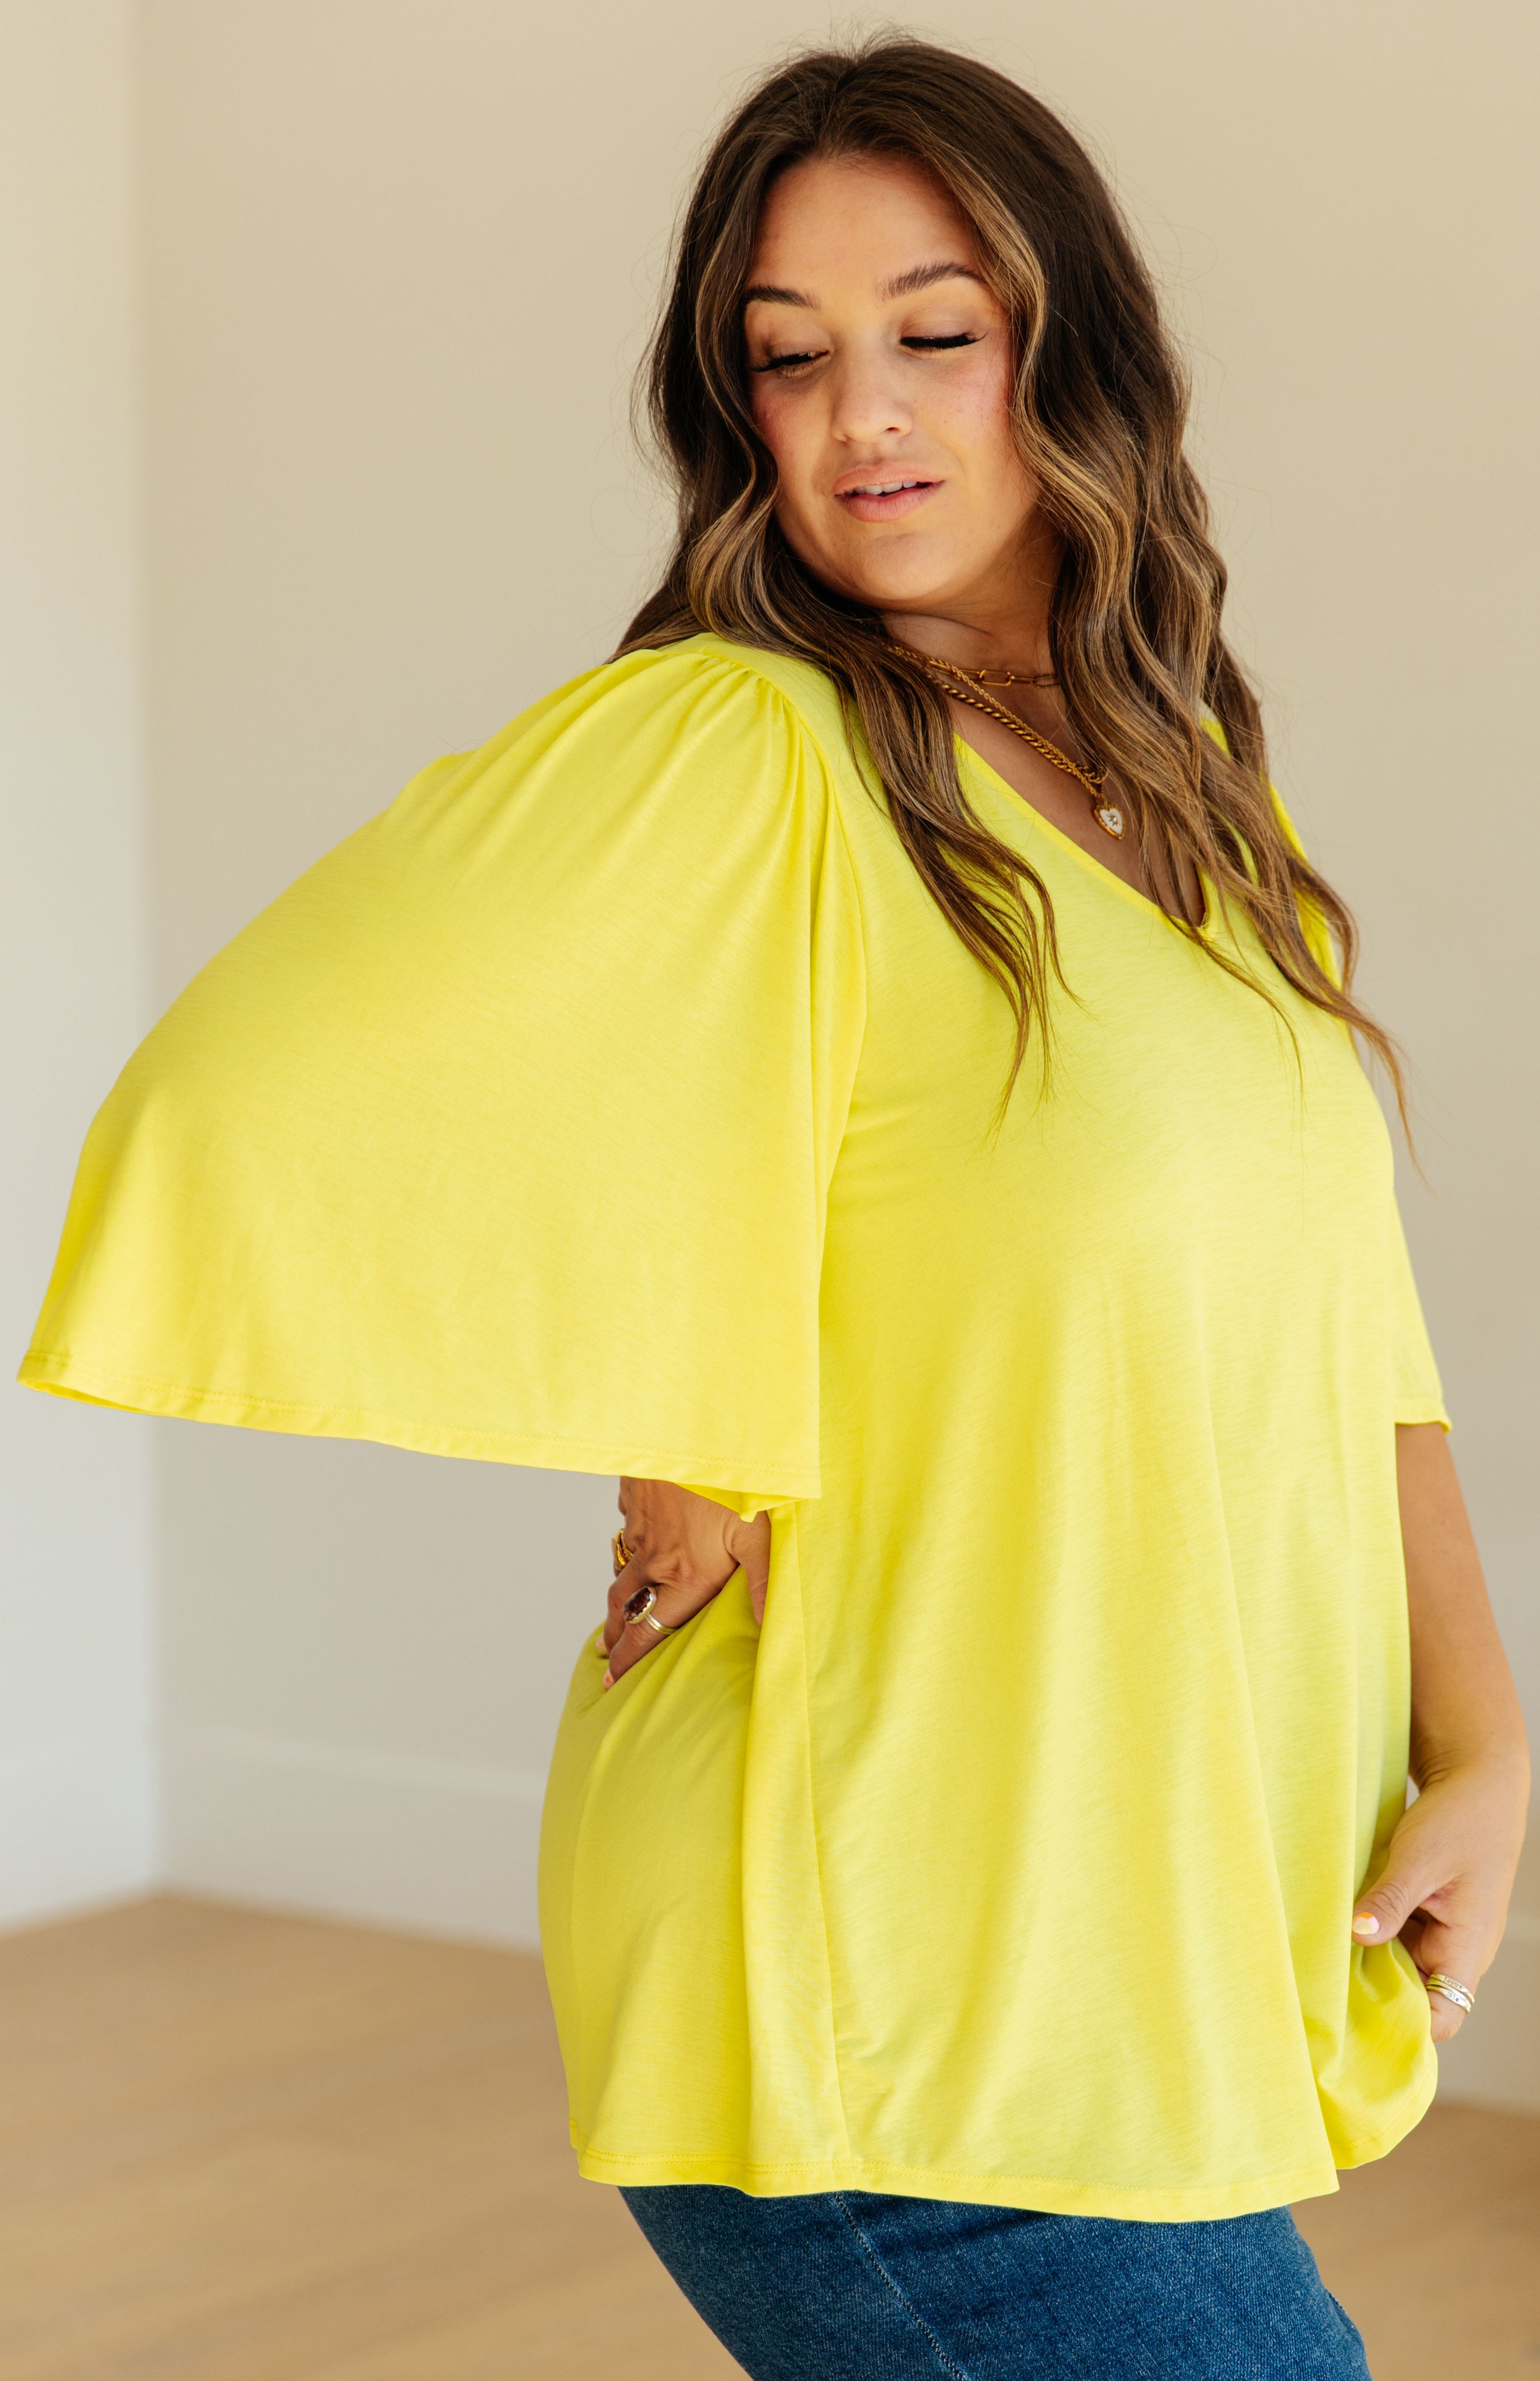 Cali Blouse in Neon Yellow Ave Shops